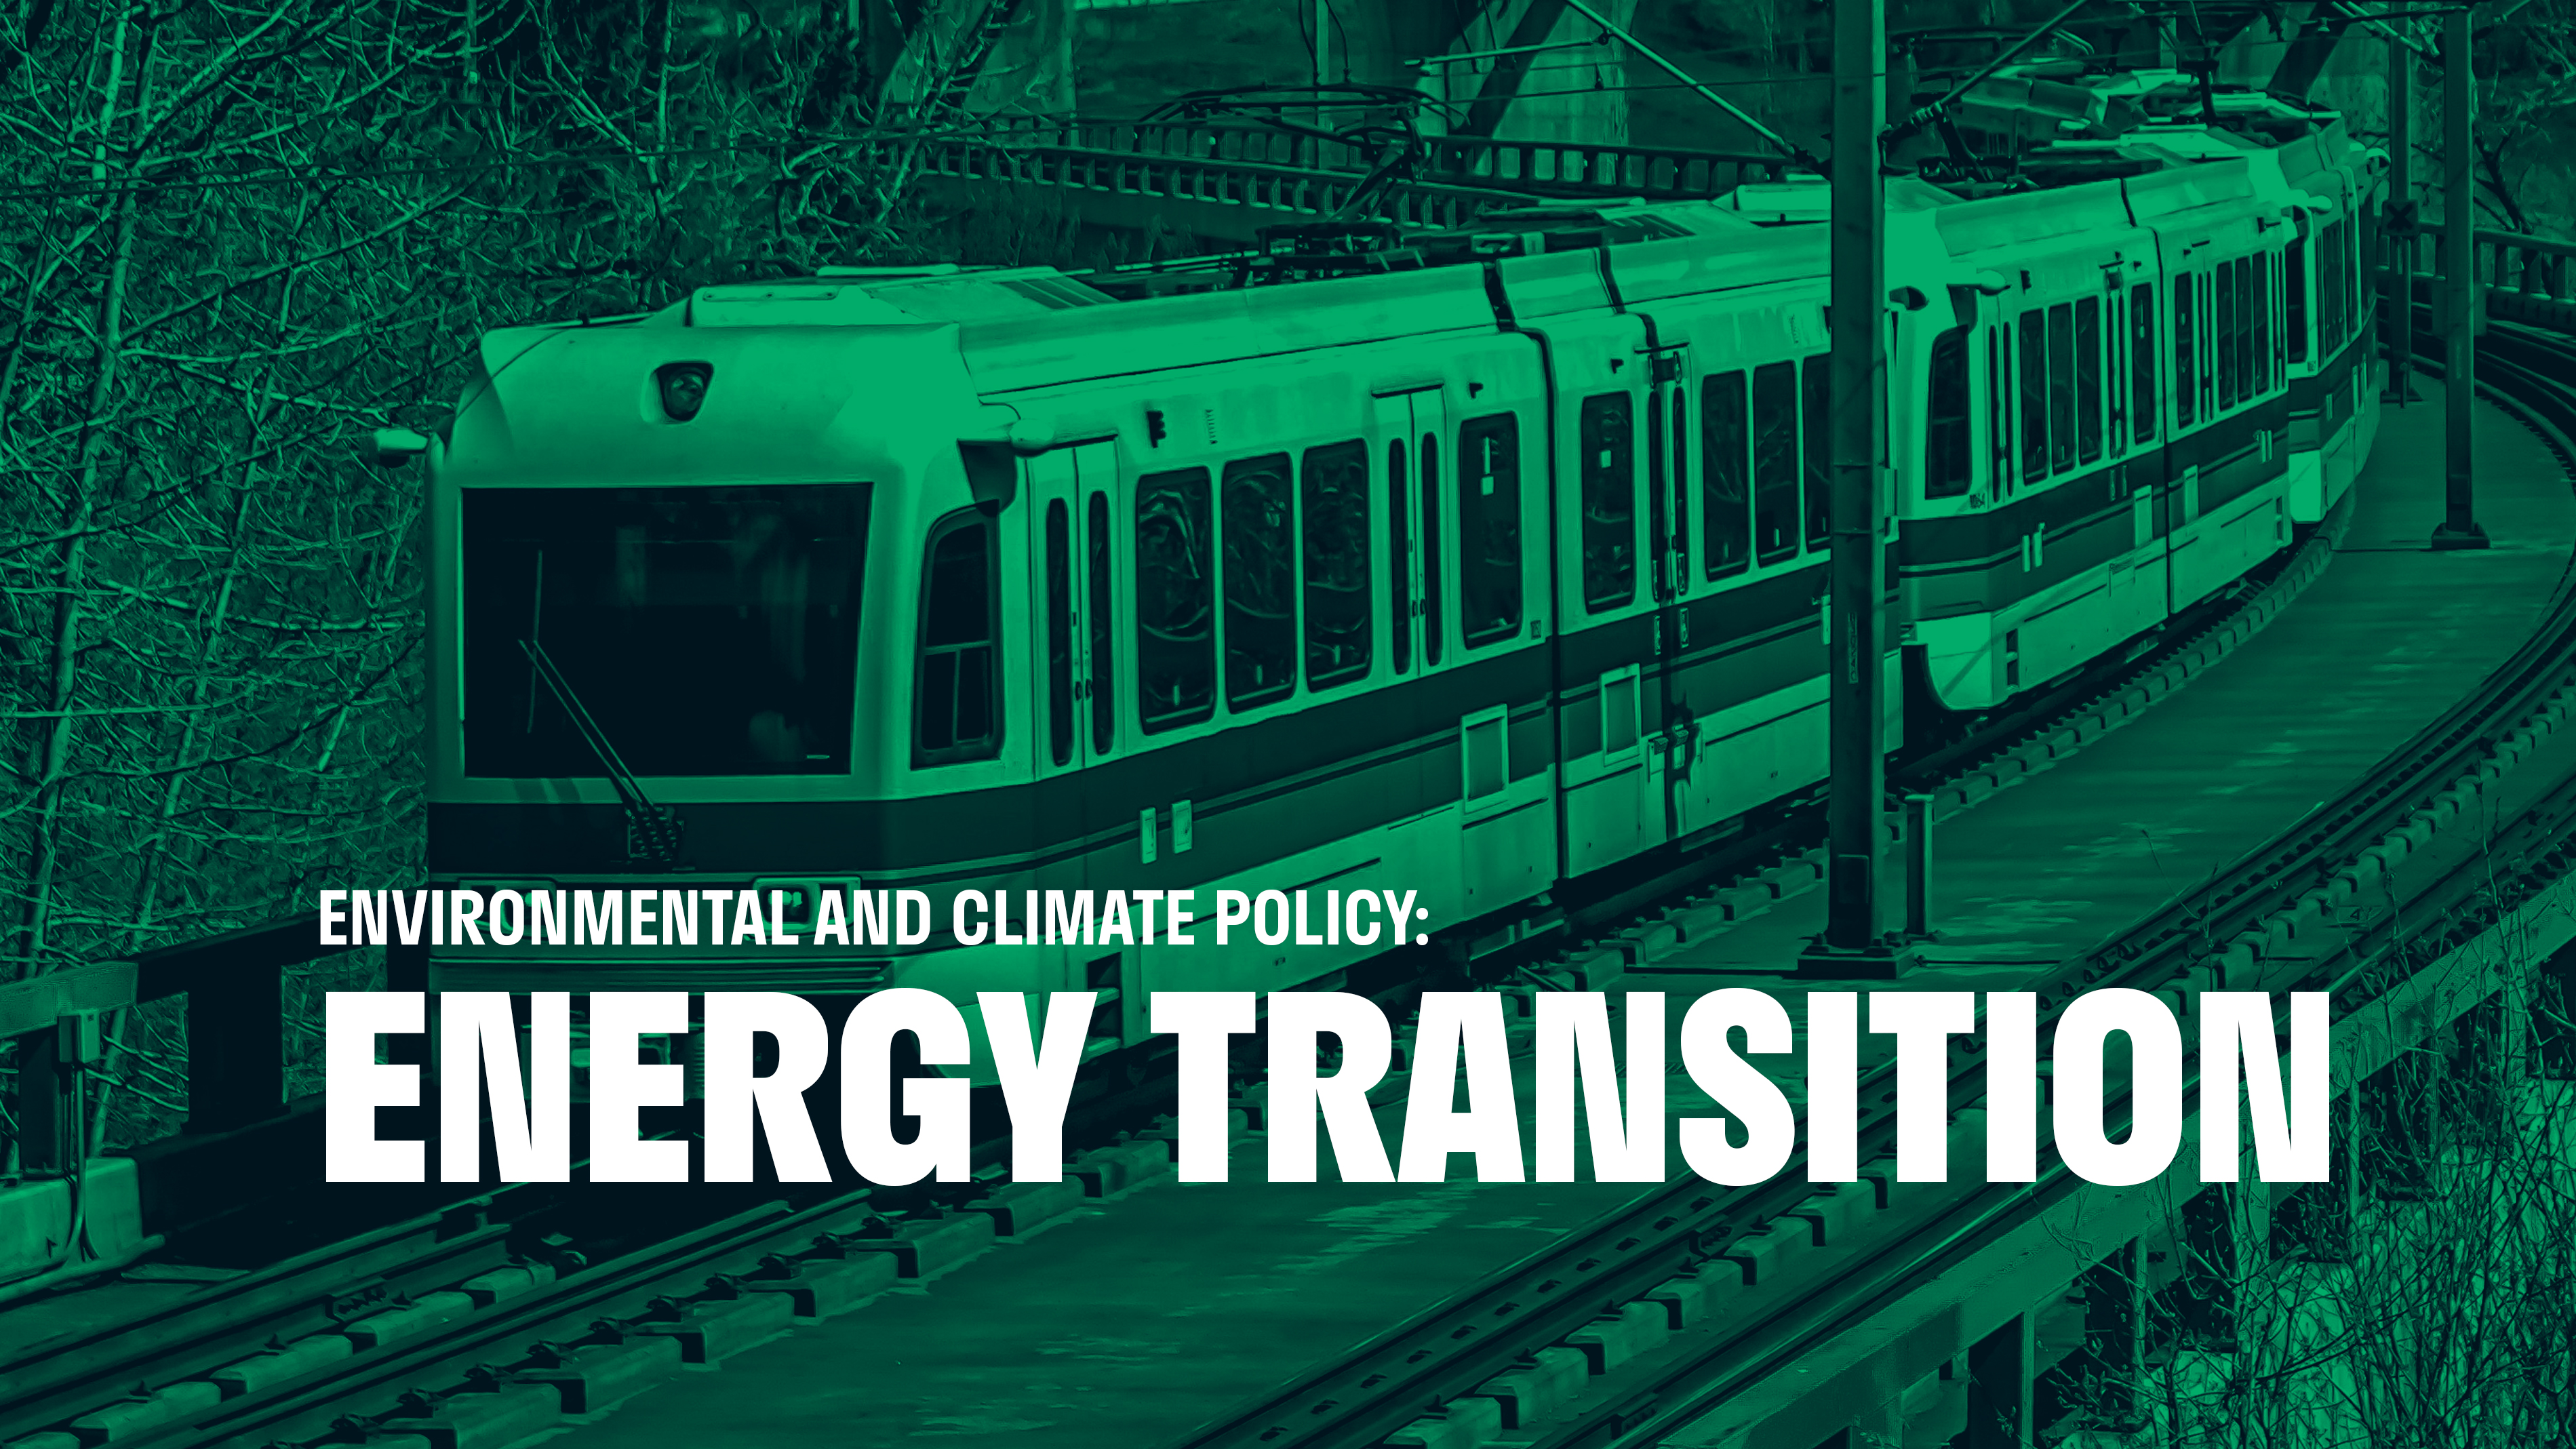 An image of the Edmonton LRT, with superimposed text that reads "Environmental and Climate Policy: Energy Transition"